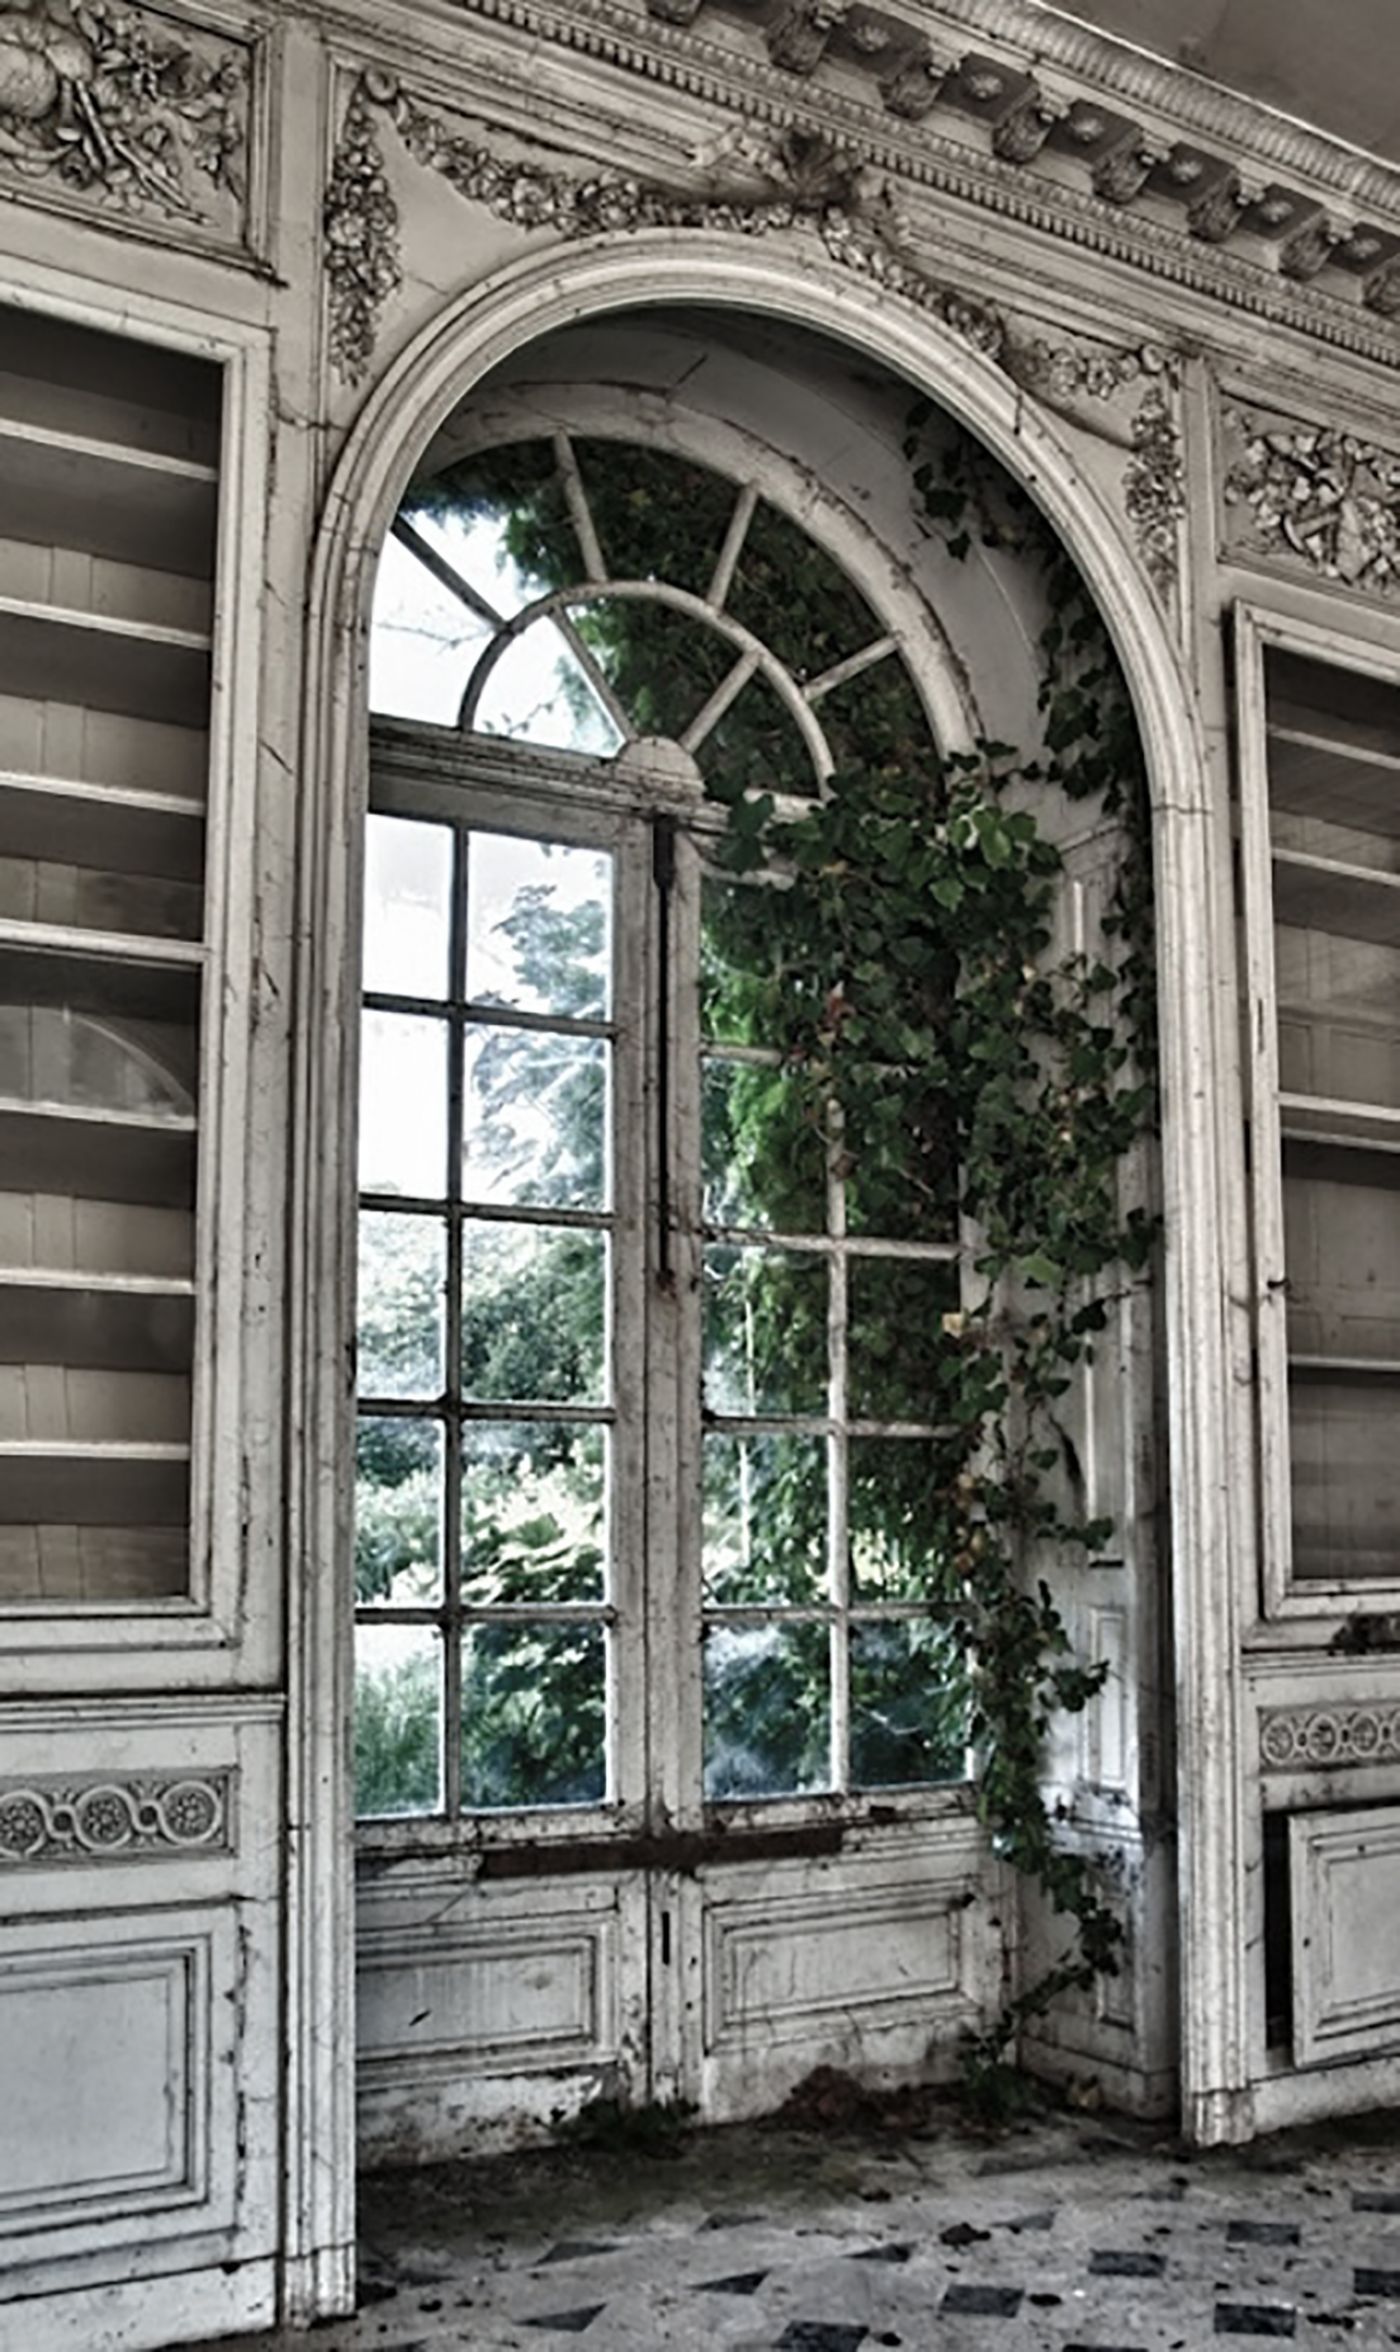 Ode to Ivy | Inspiration | Pinterest | Abandoned, Doors and ...